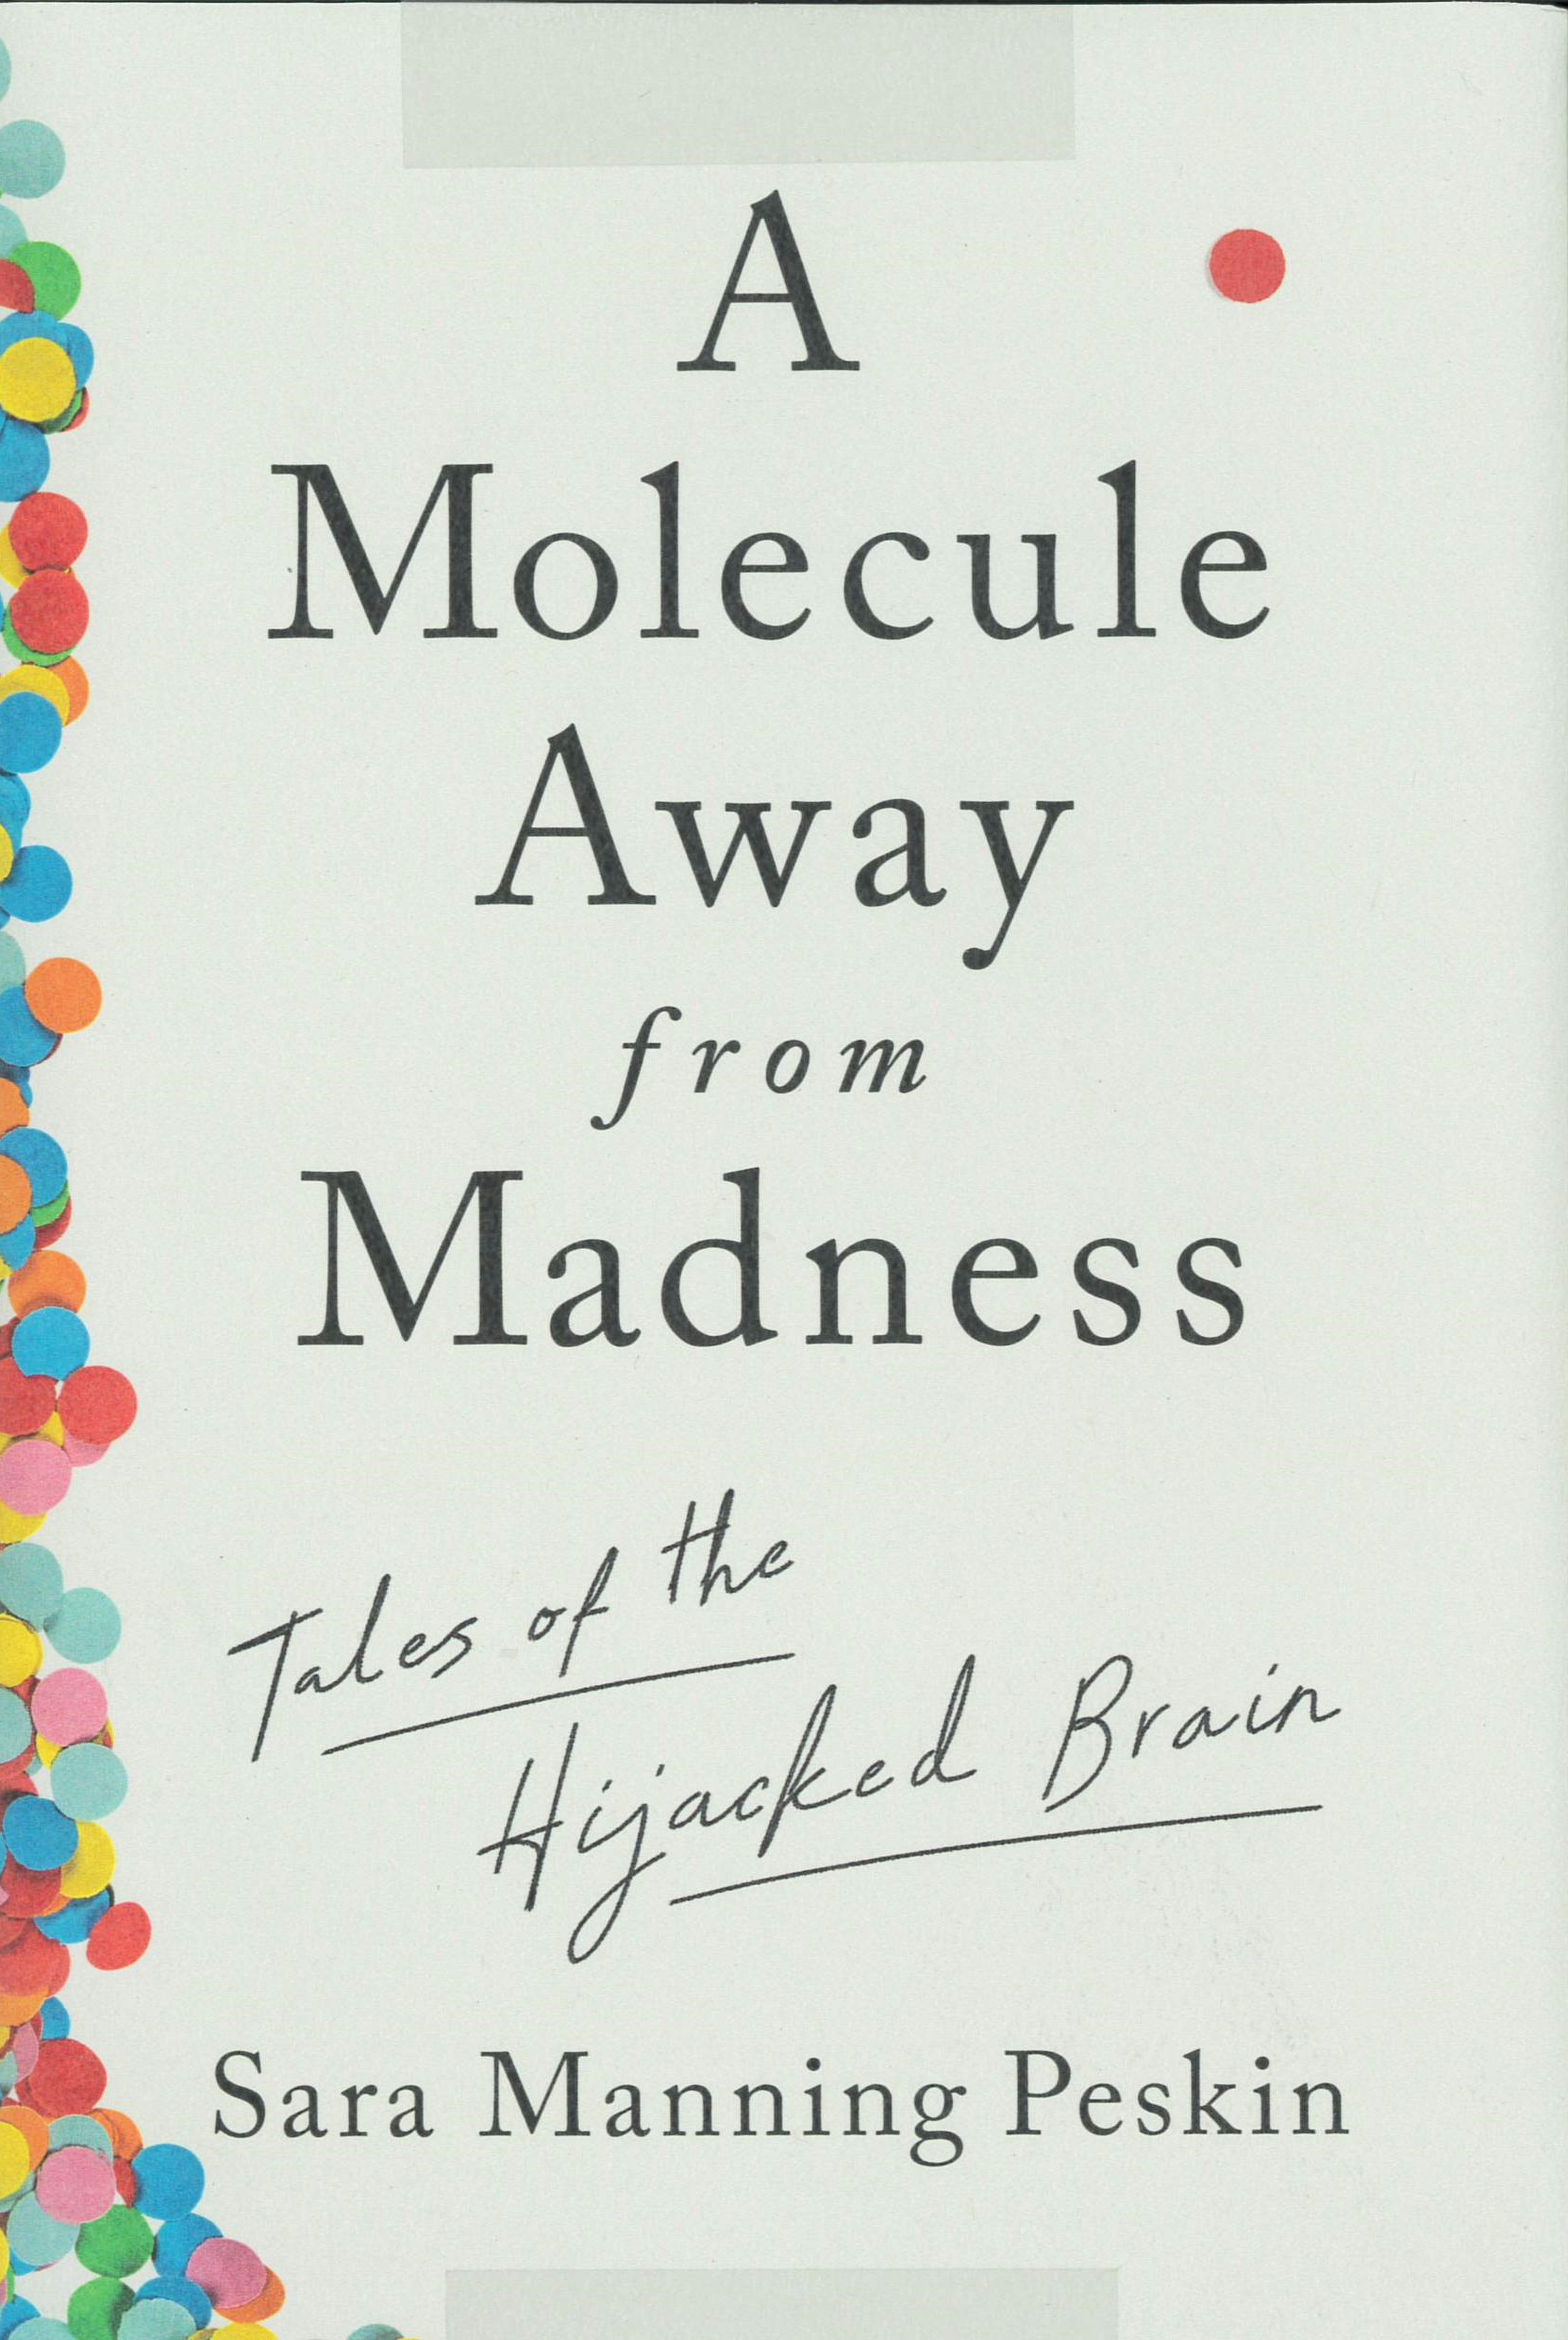 A molecule away from madness : tales of the hijacked brain /